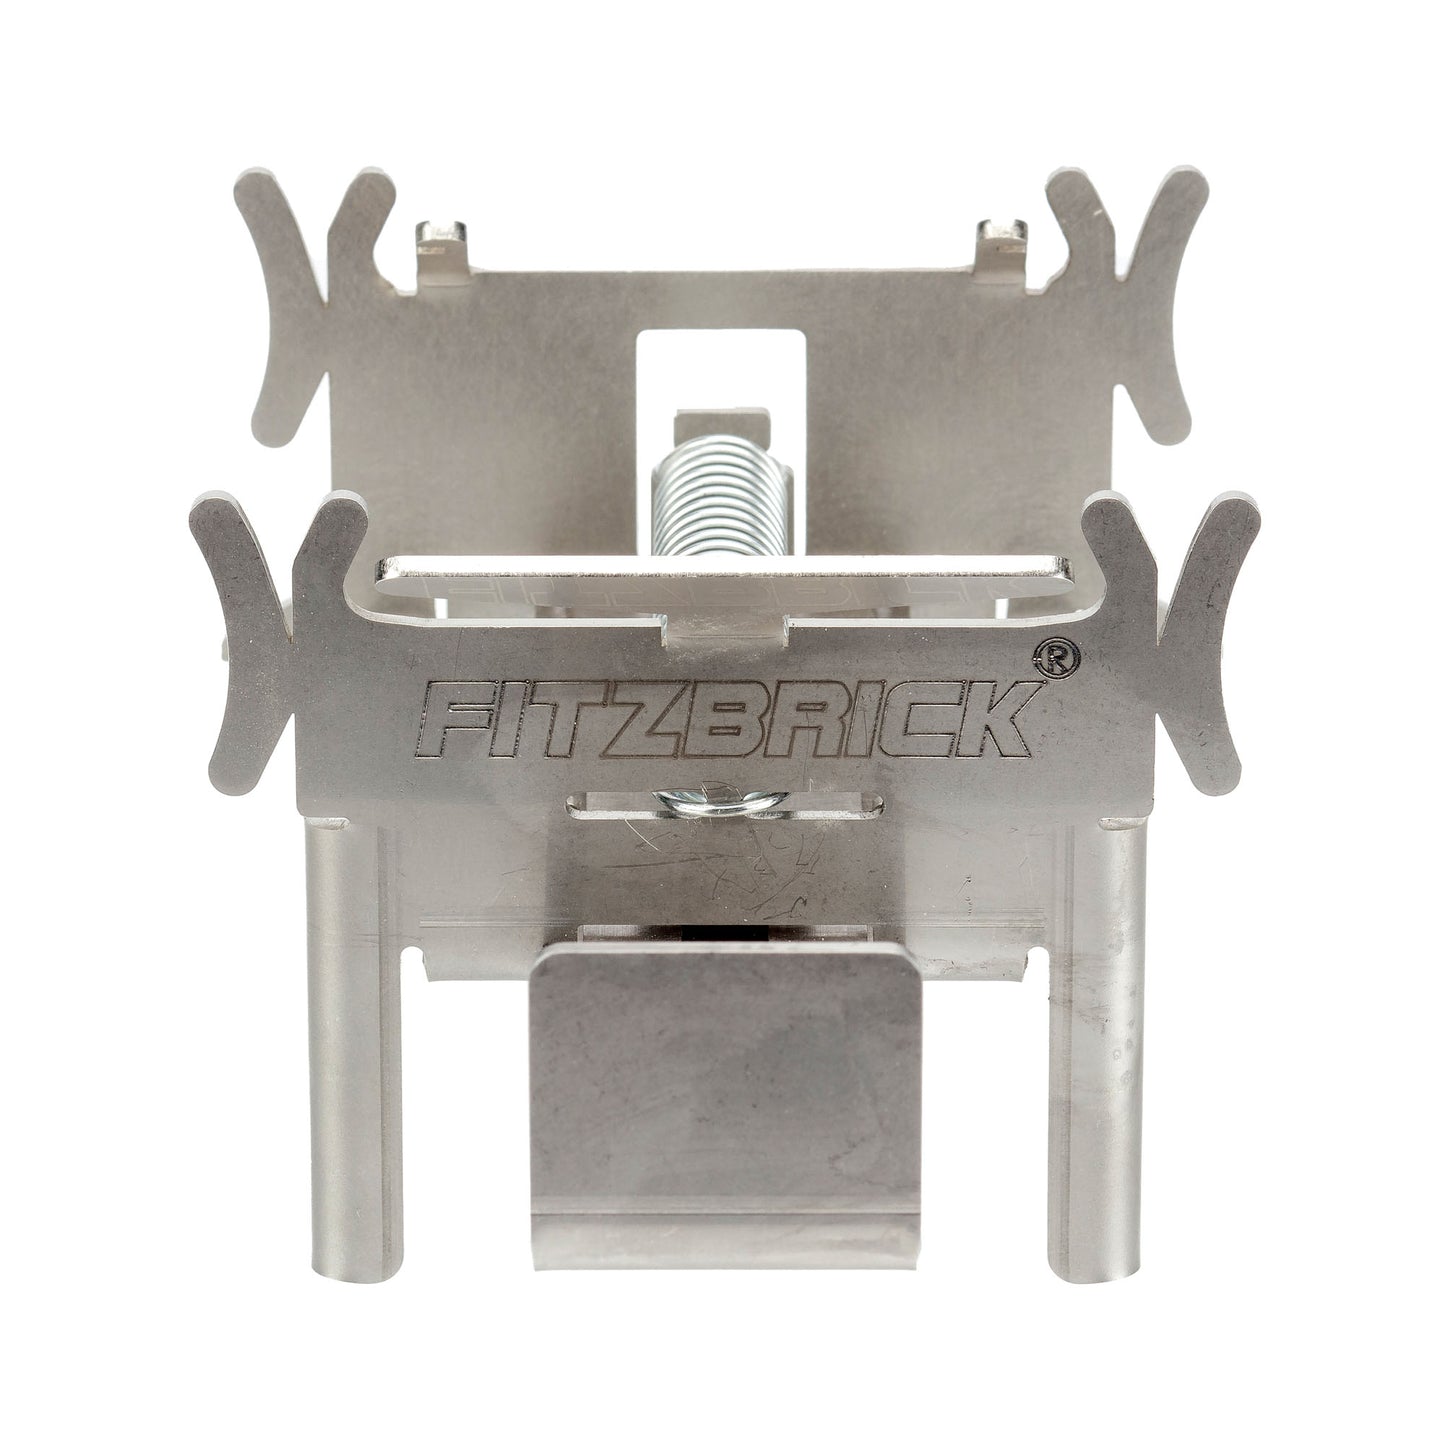 FitzBrick Penny Clamp TM (Single) - EXTENDS TO 237MM